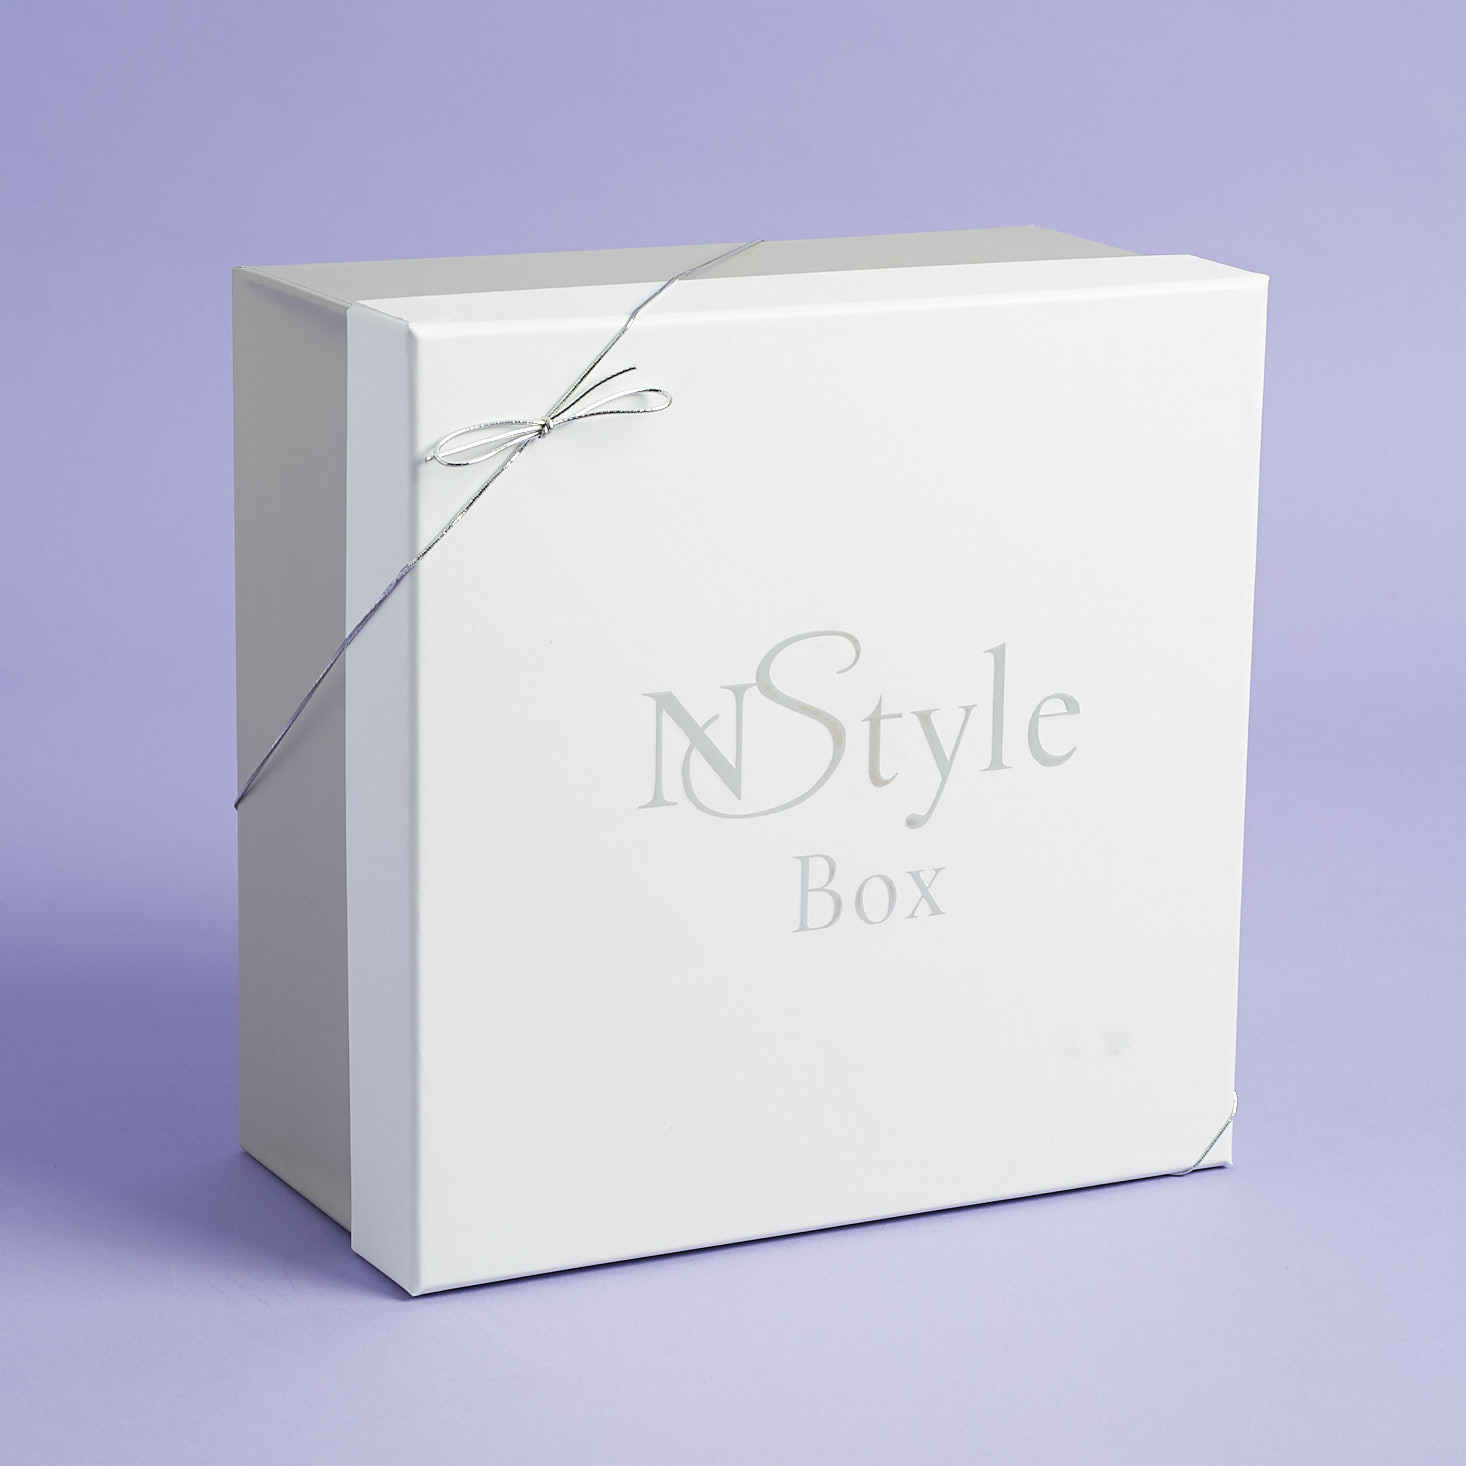 At Home with Nikki NStyle Subscription Box Review – August 2017